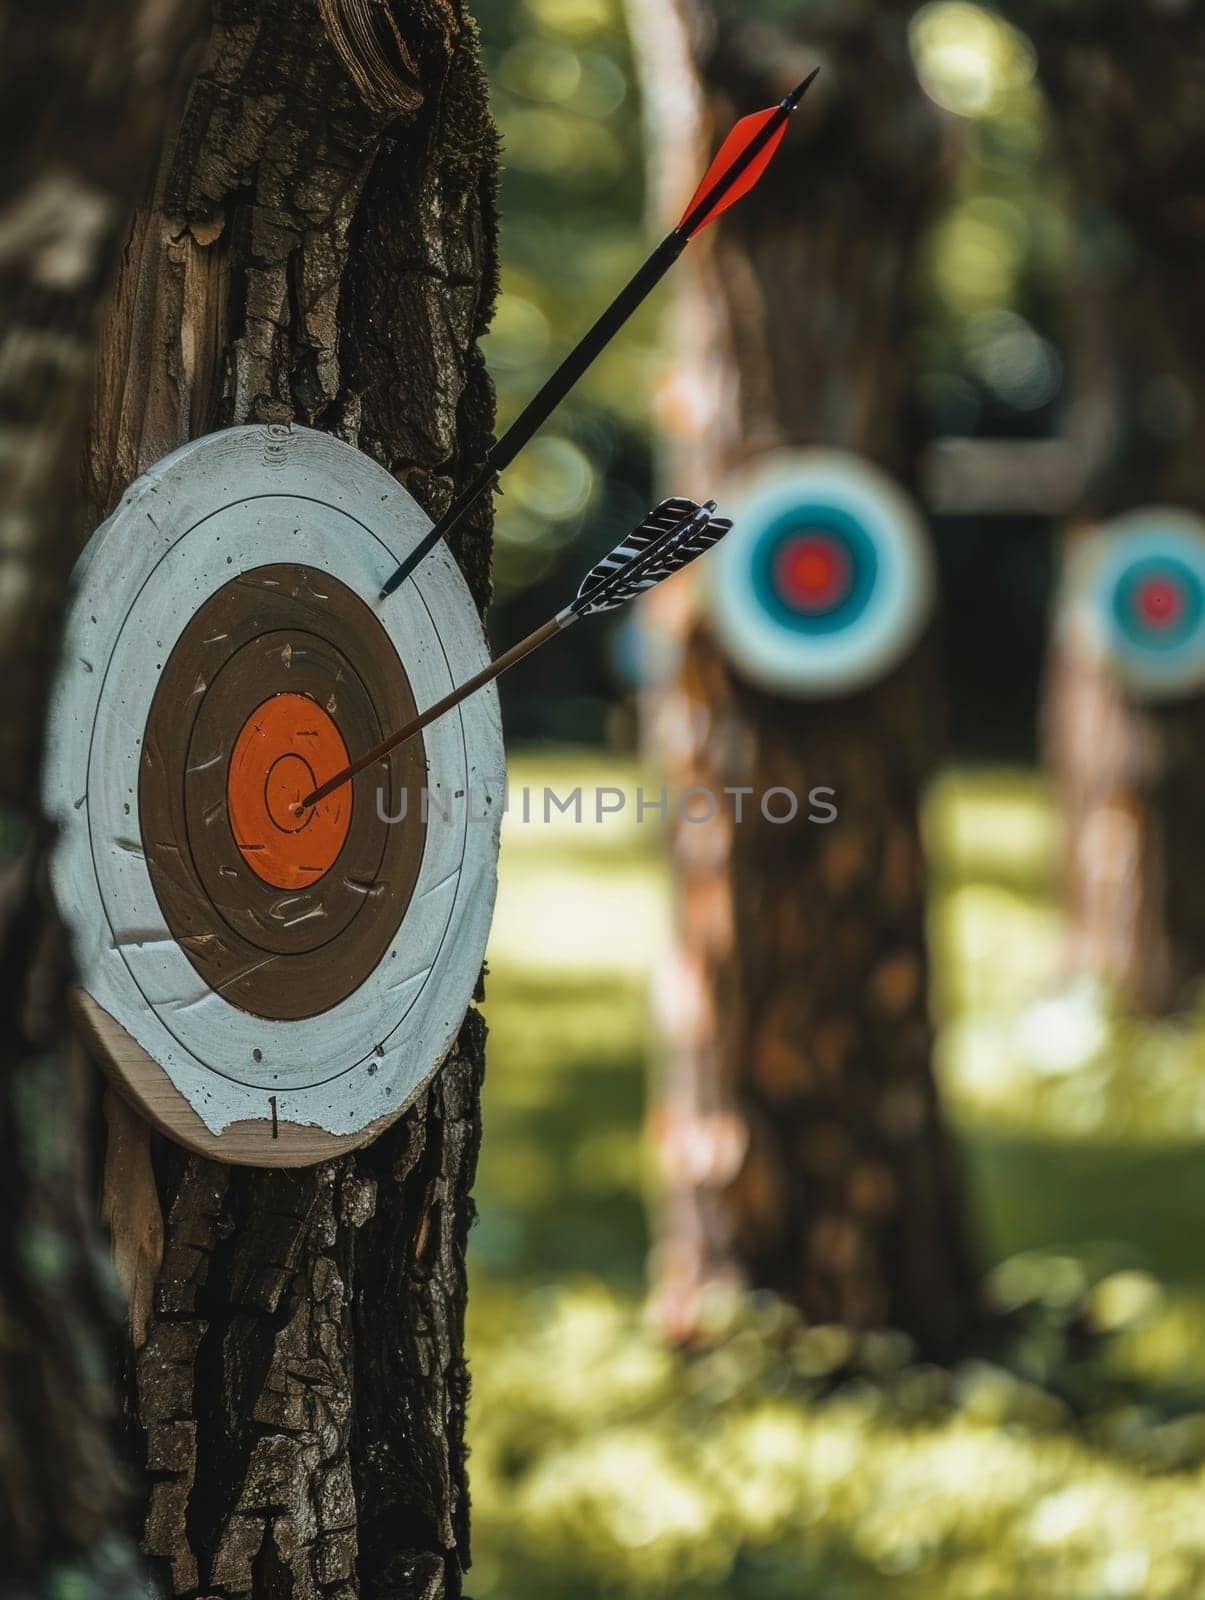 A weathered archery target is affixed to the trunk of a tree in a lush, verdant forest. A red-tipped arrow is embedded in the target, suggesting an accurate shot